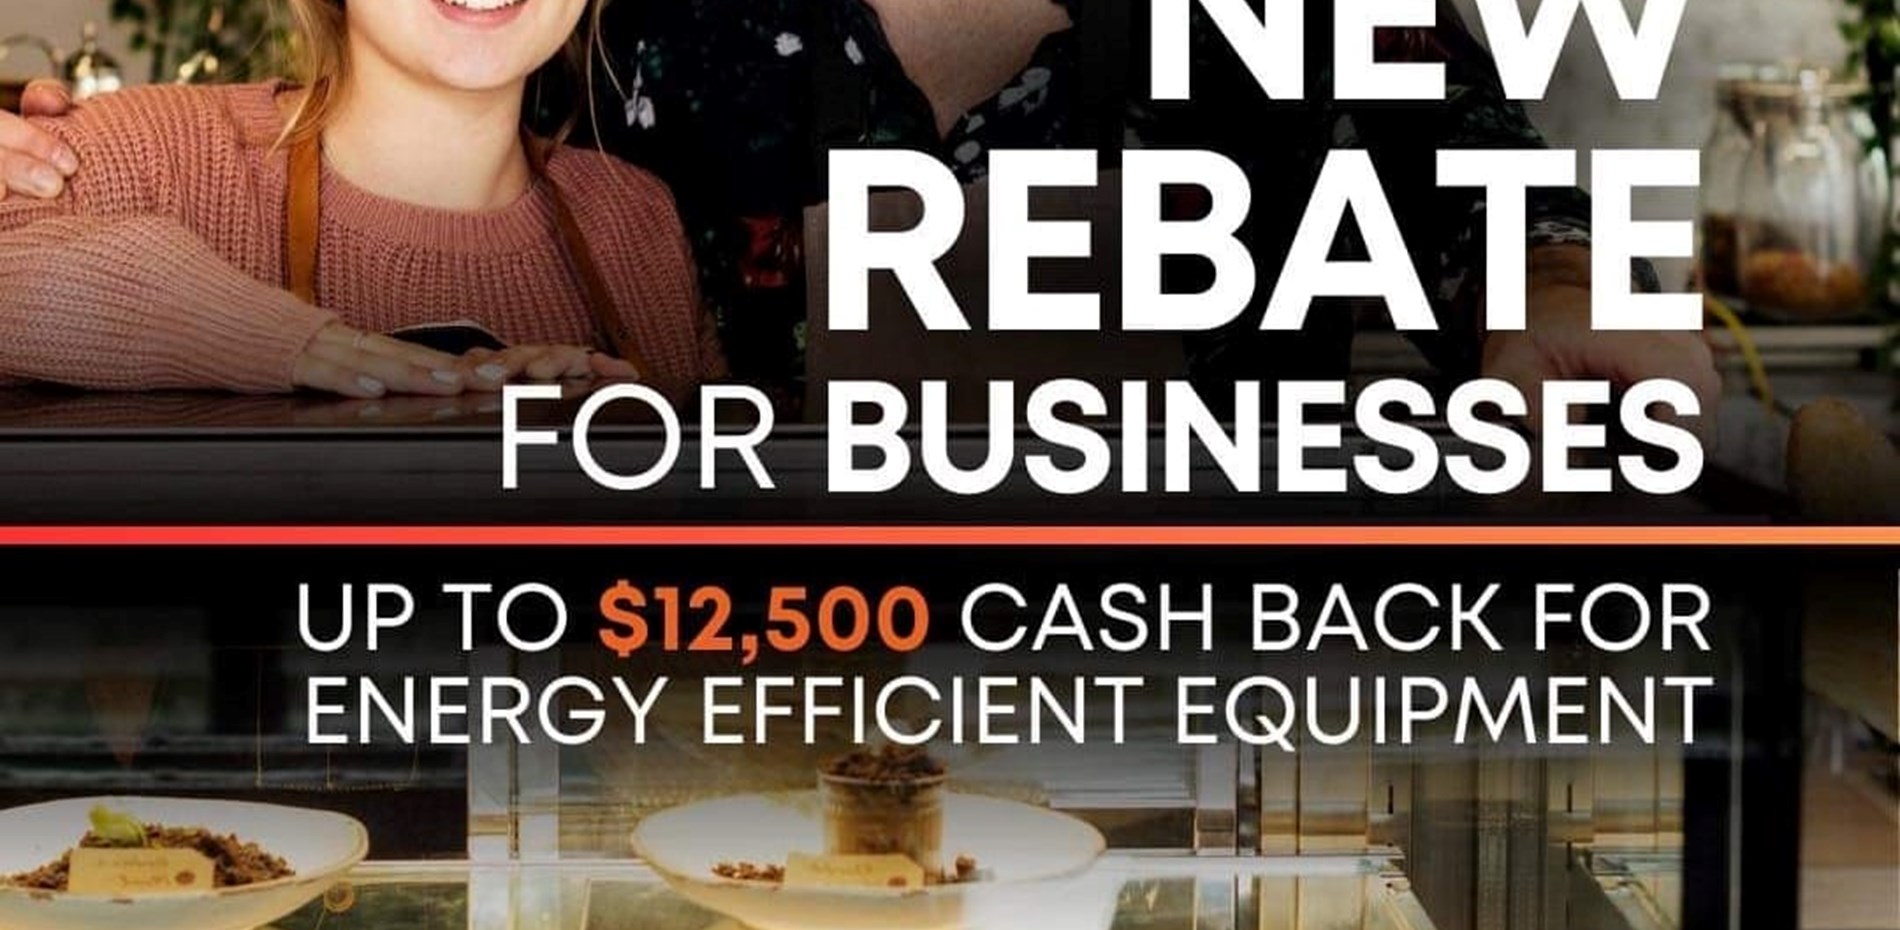 Small business boost to encourage energy efficiency Main Image